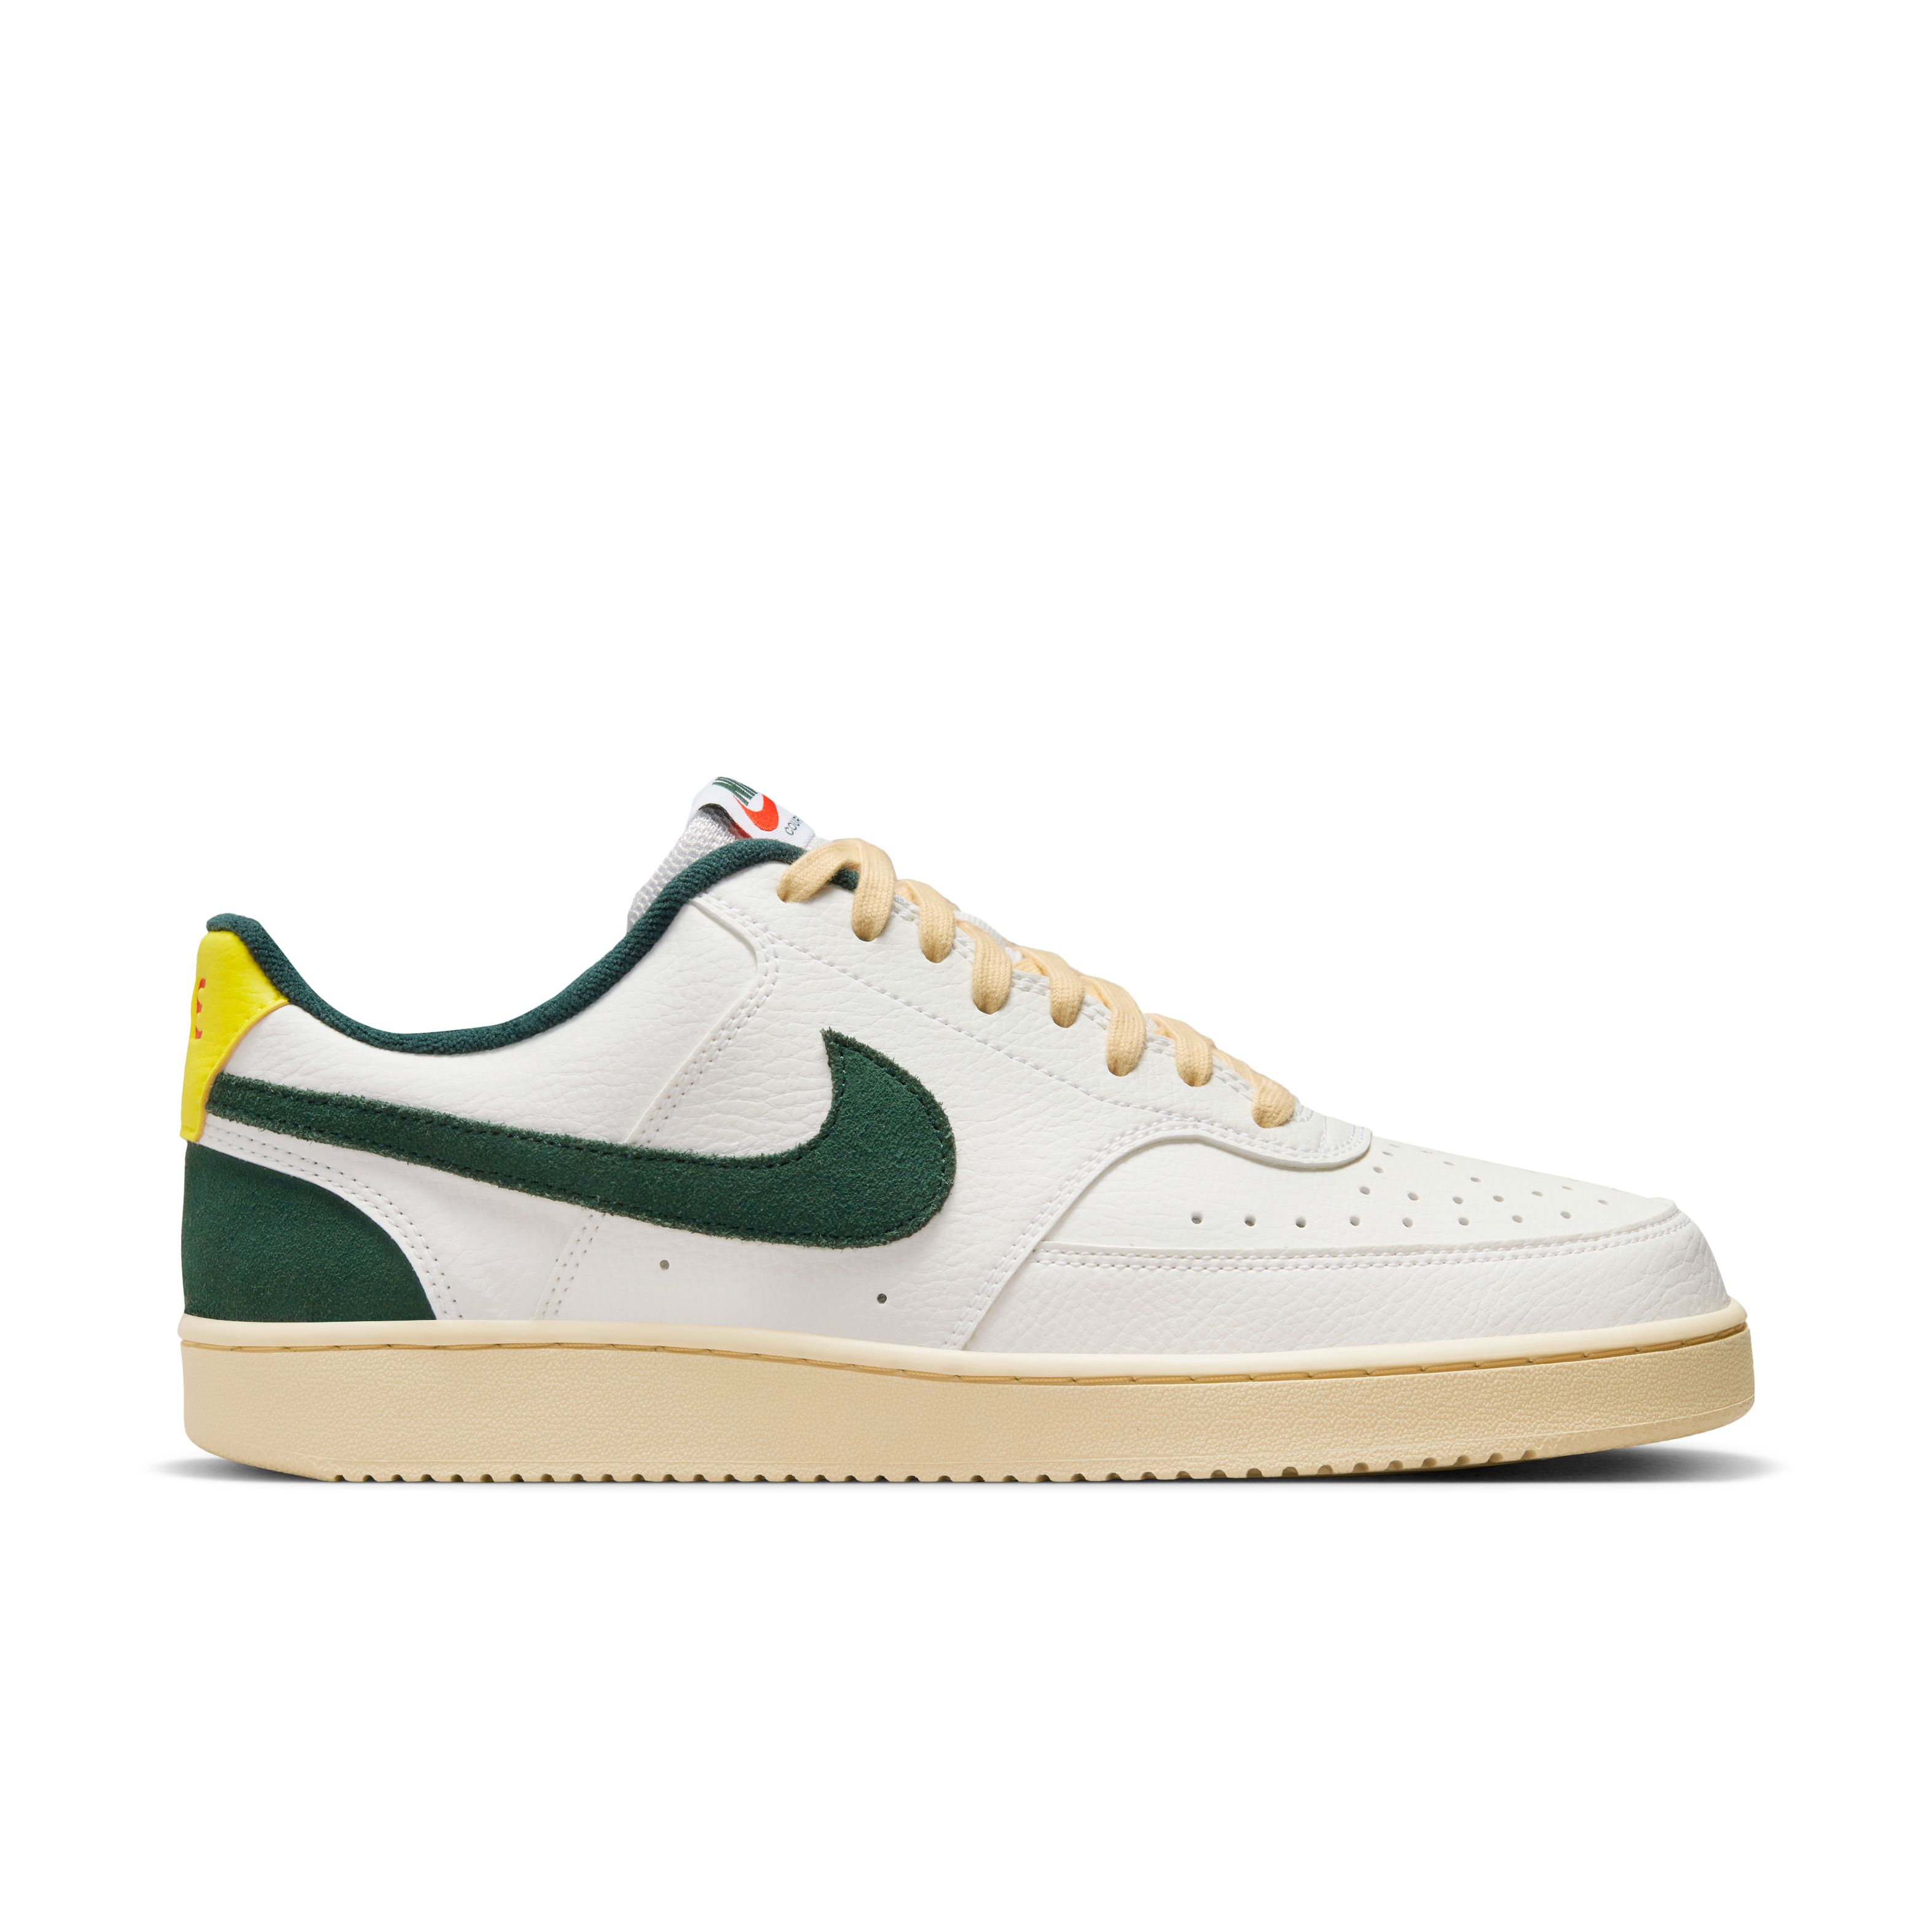 Nike Cout Vision Low heren sneaker - Off White - Maat 44